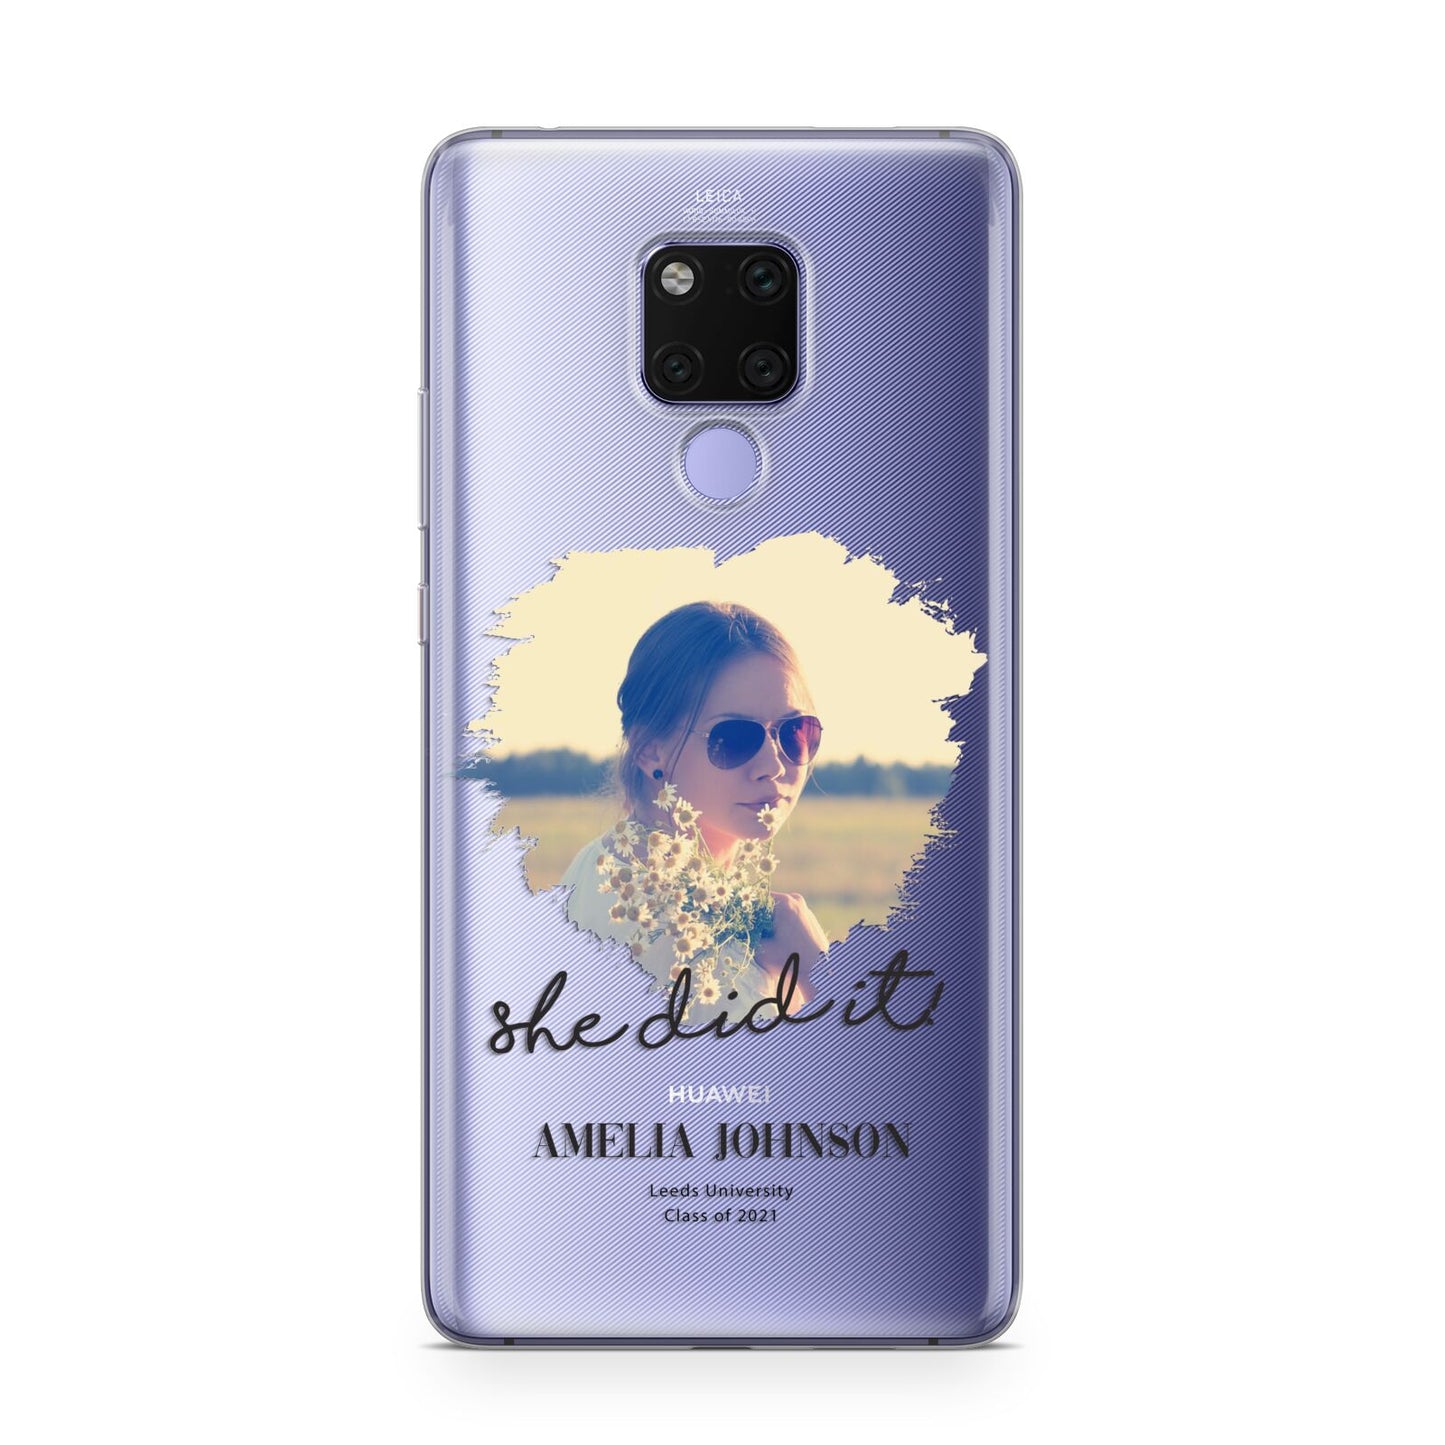 She Did It Graduation Photo with Name Huawei Mate 20X Phone Case